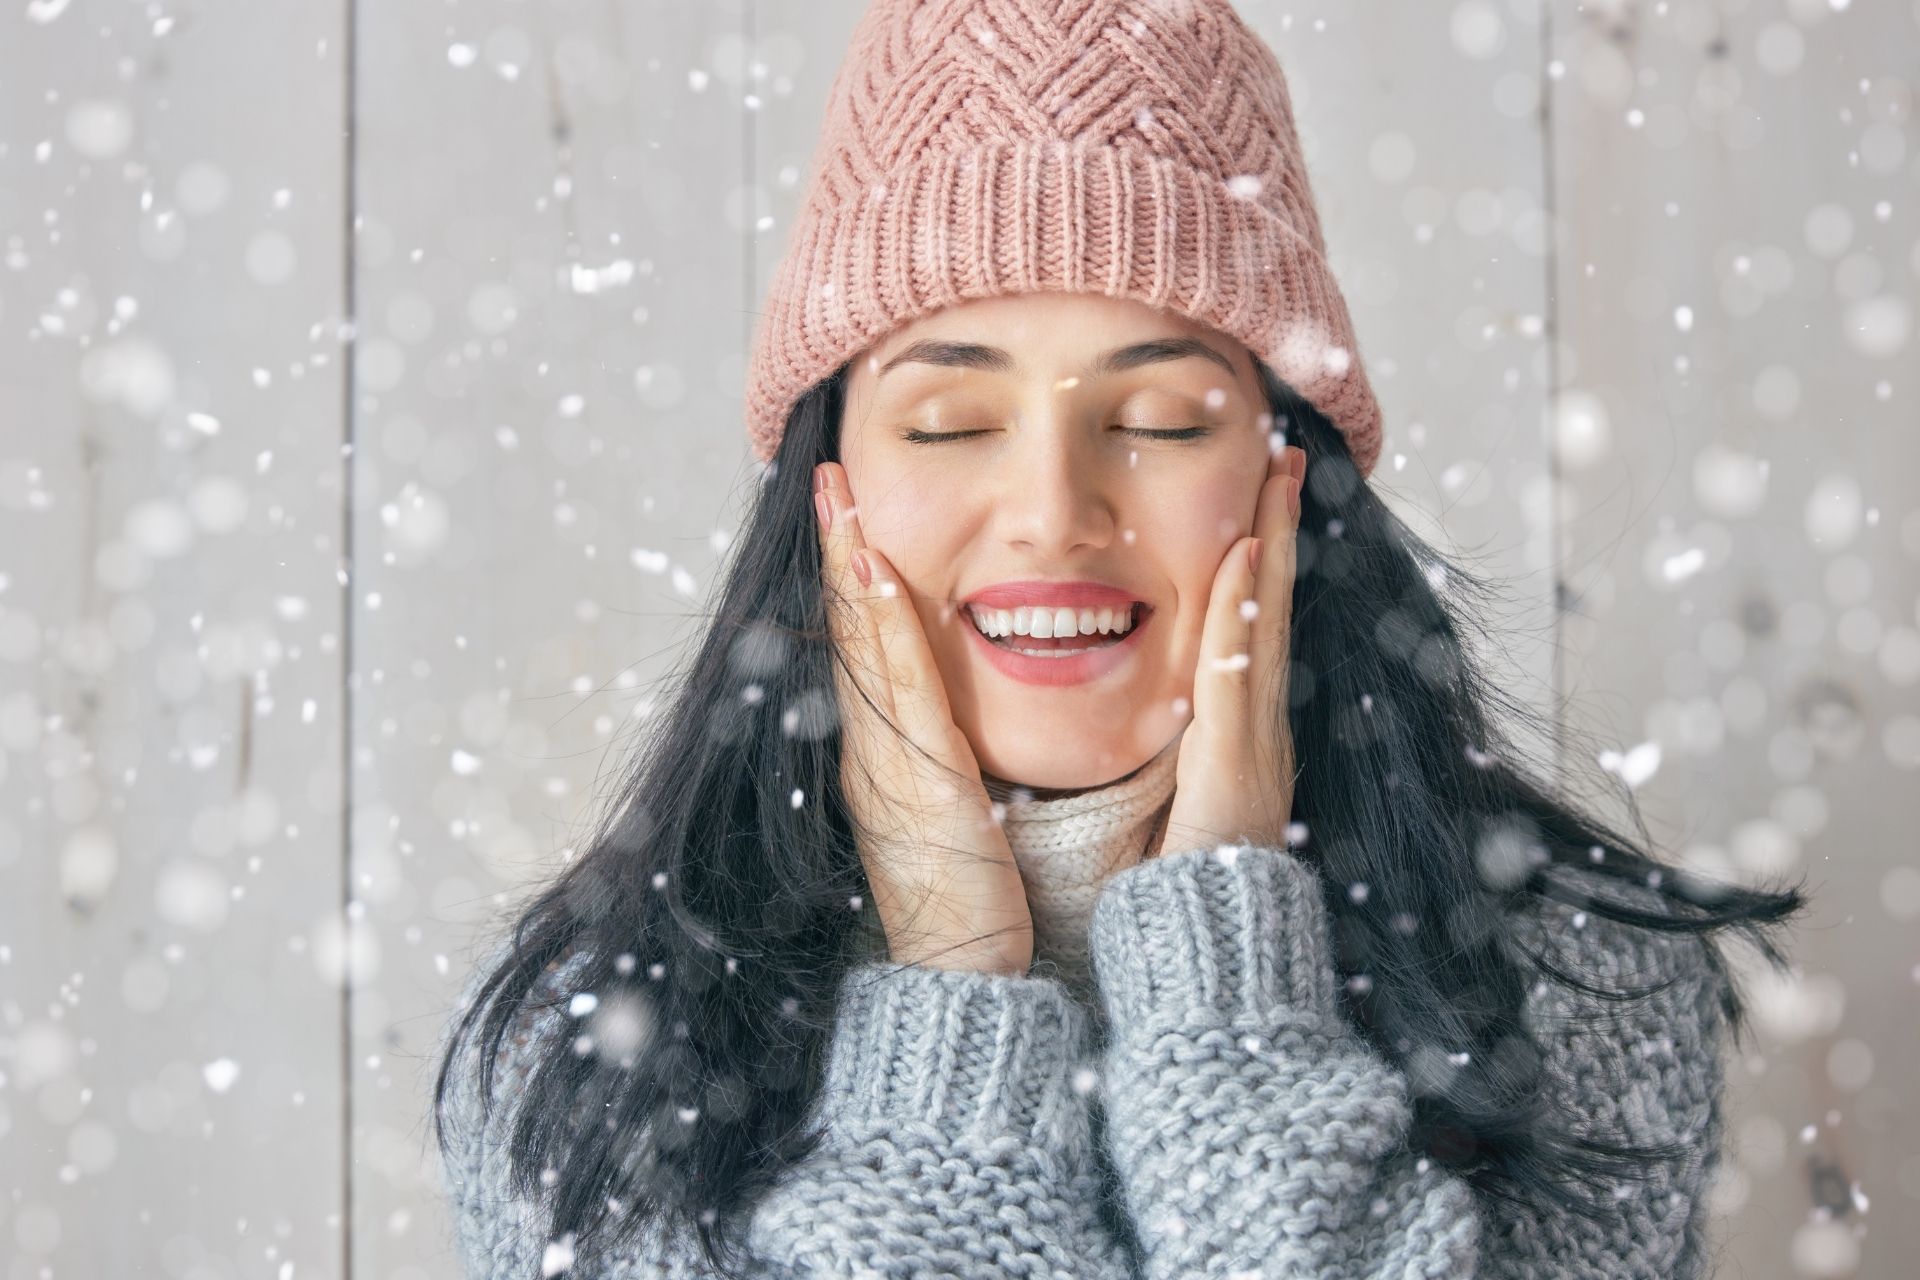 DM Treatment Winter-Proof Your Skin 4 Tips to Keep It Looking Flawless All Season - Cover